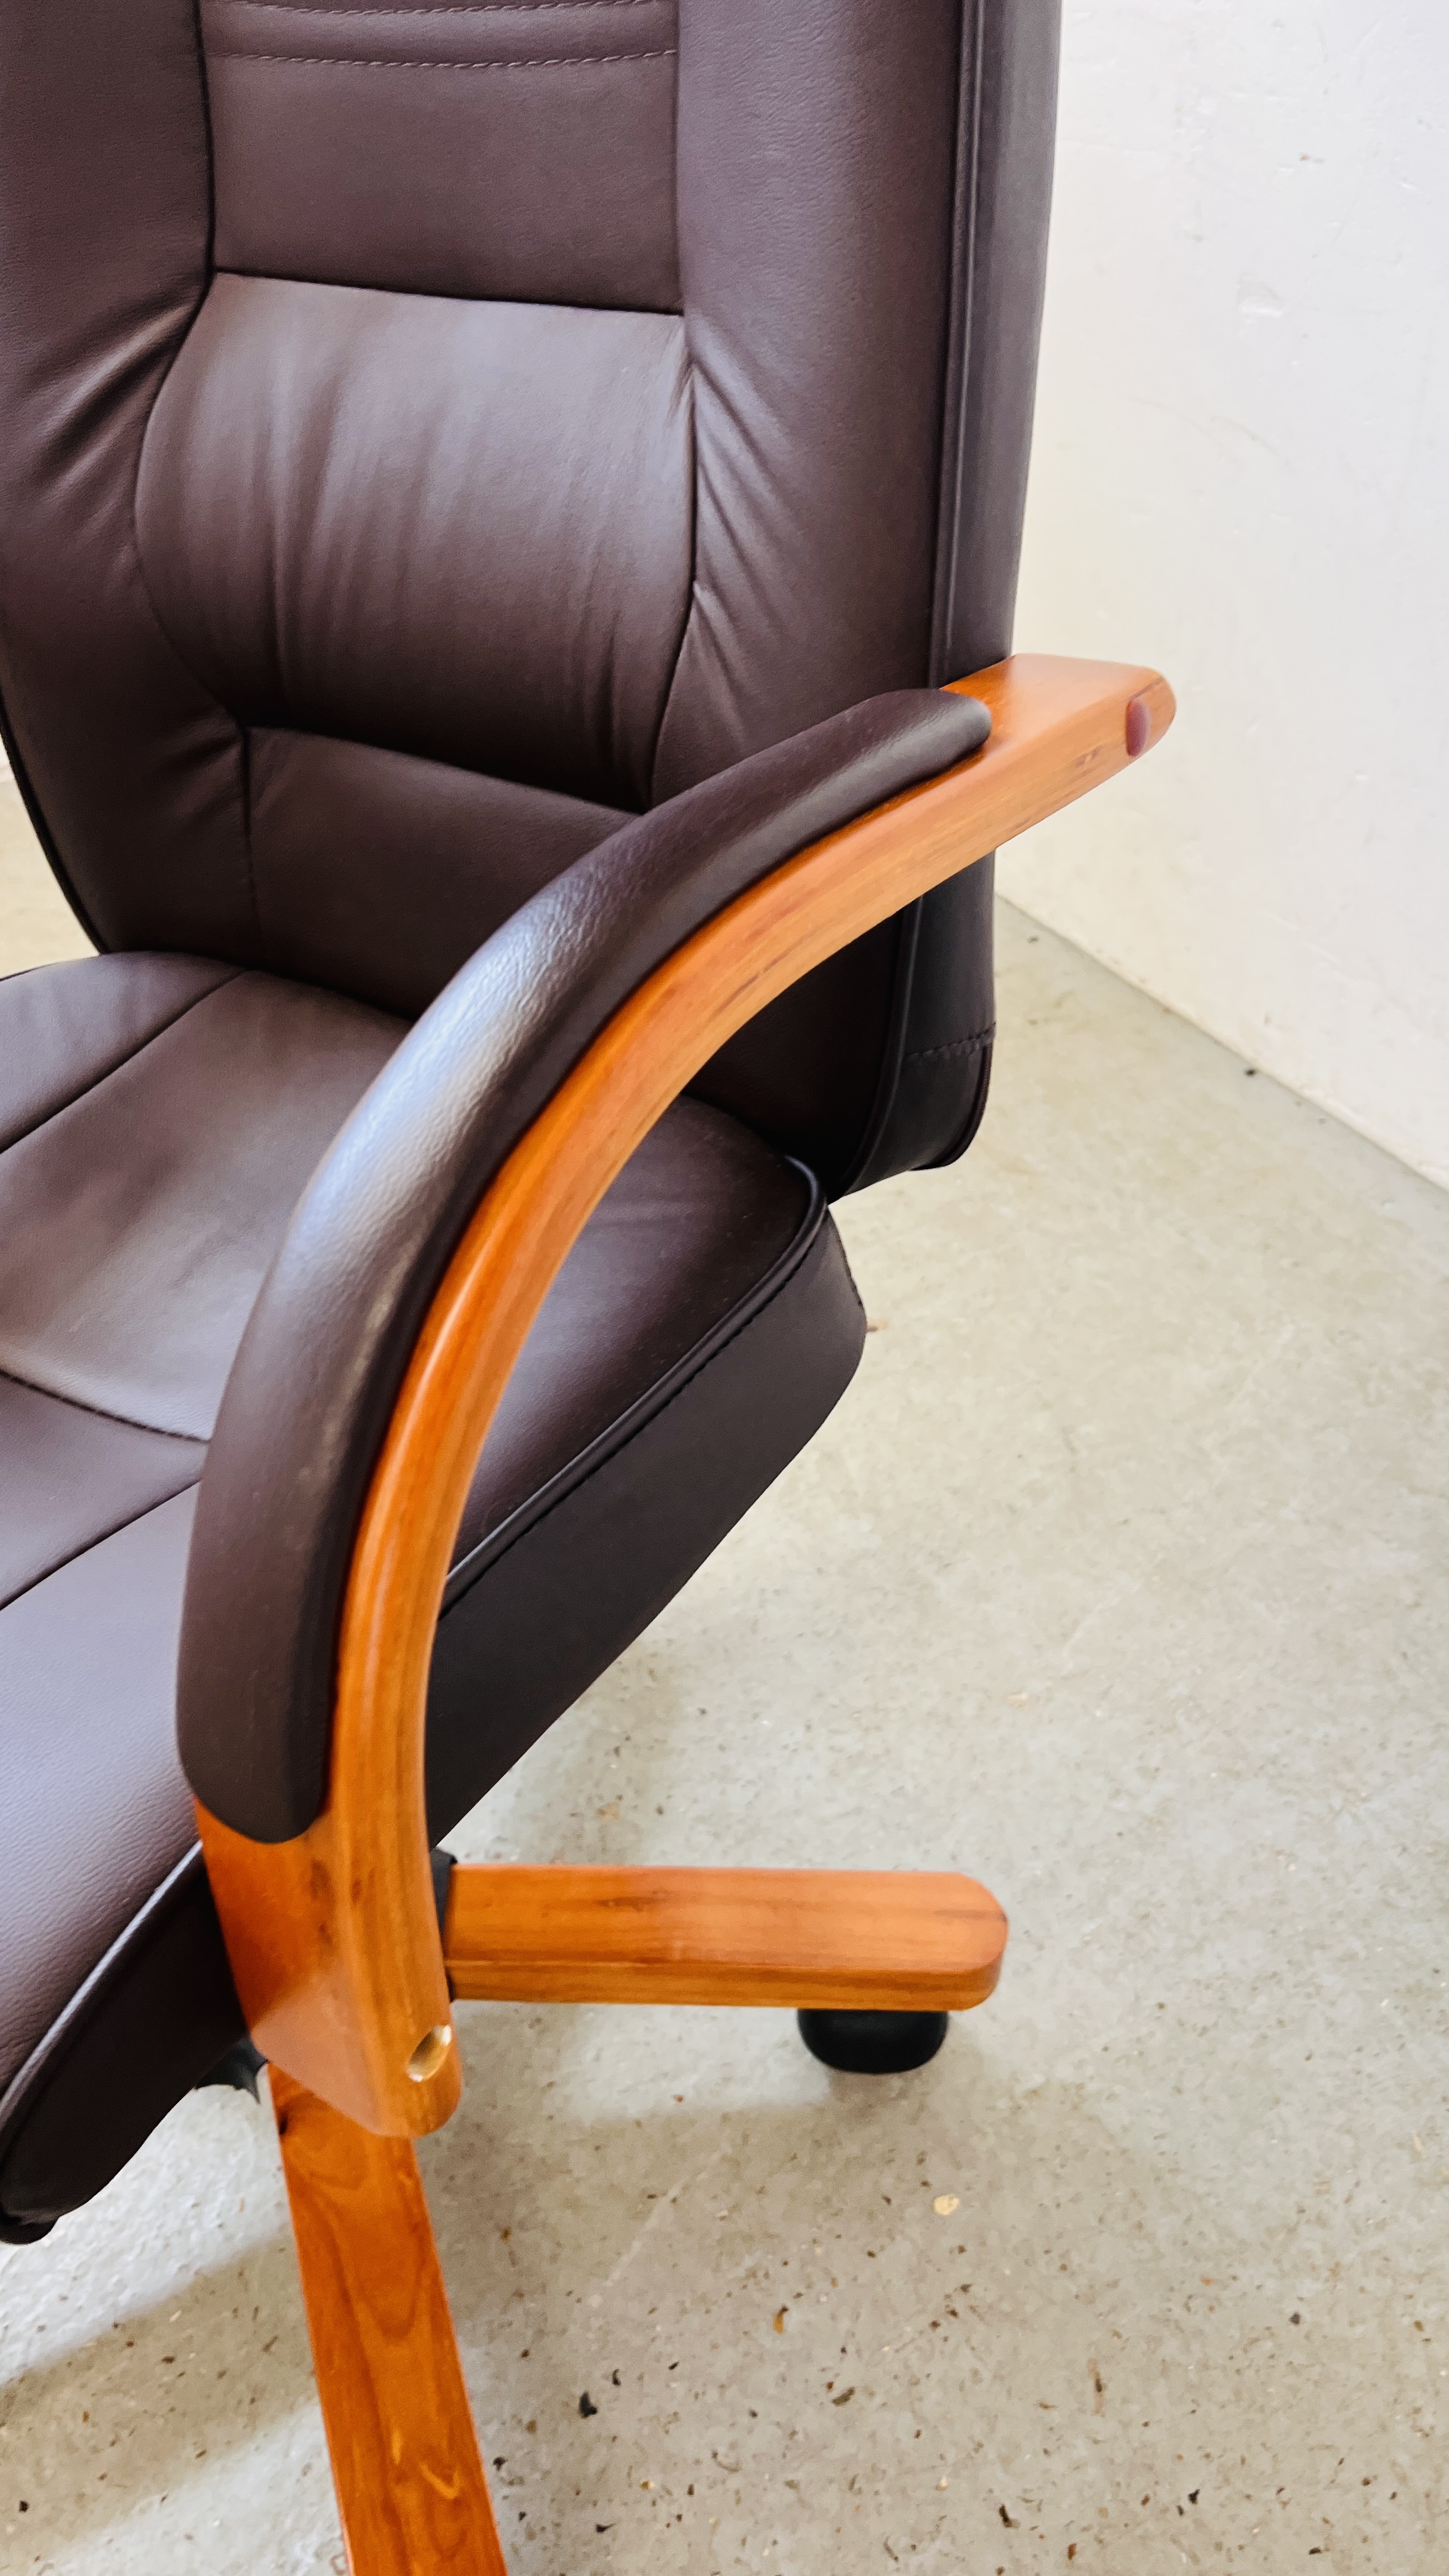 A GOOD QUALITY EXECUTIVE HOME OFFICE CHAIR - Image 4 of 7